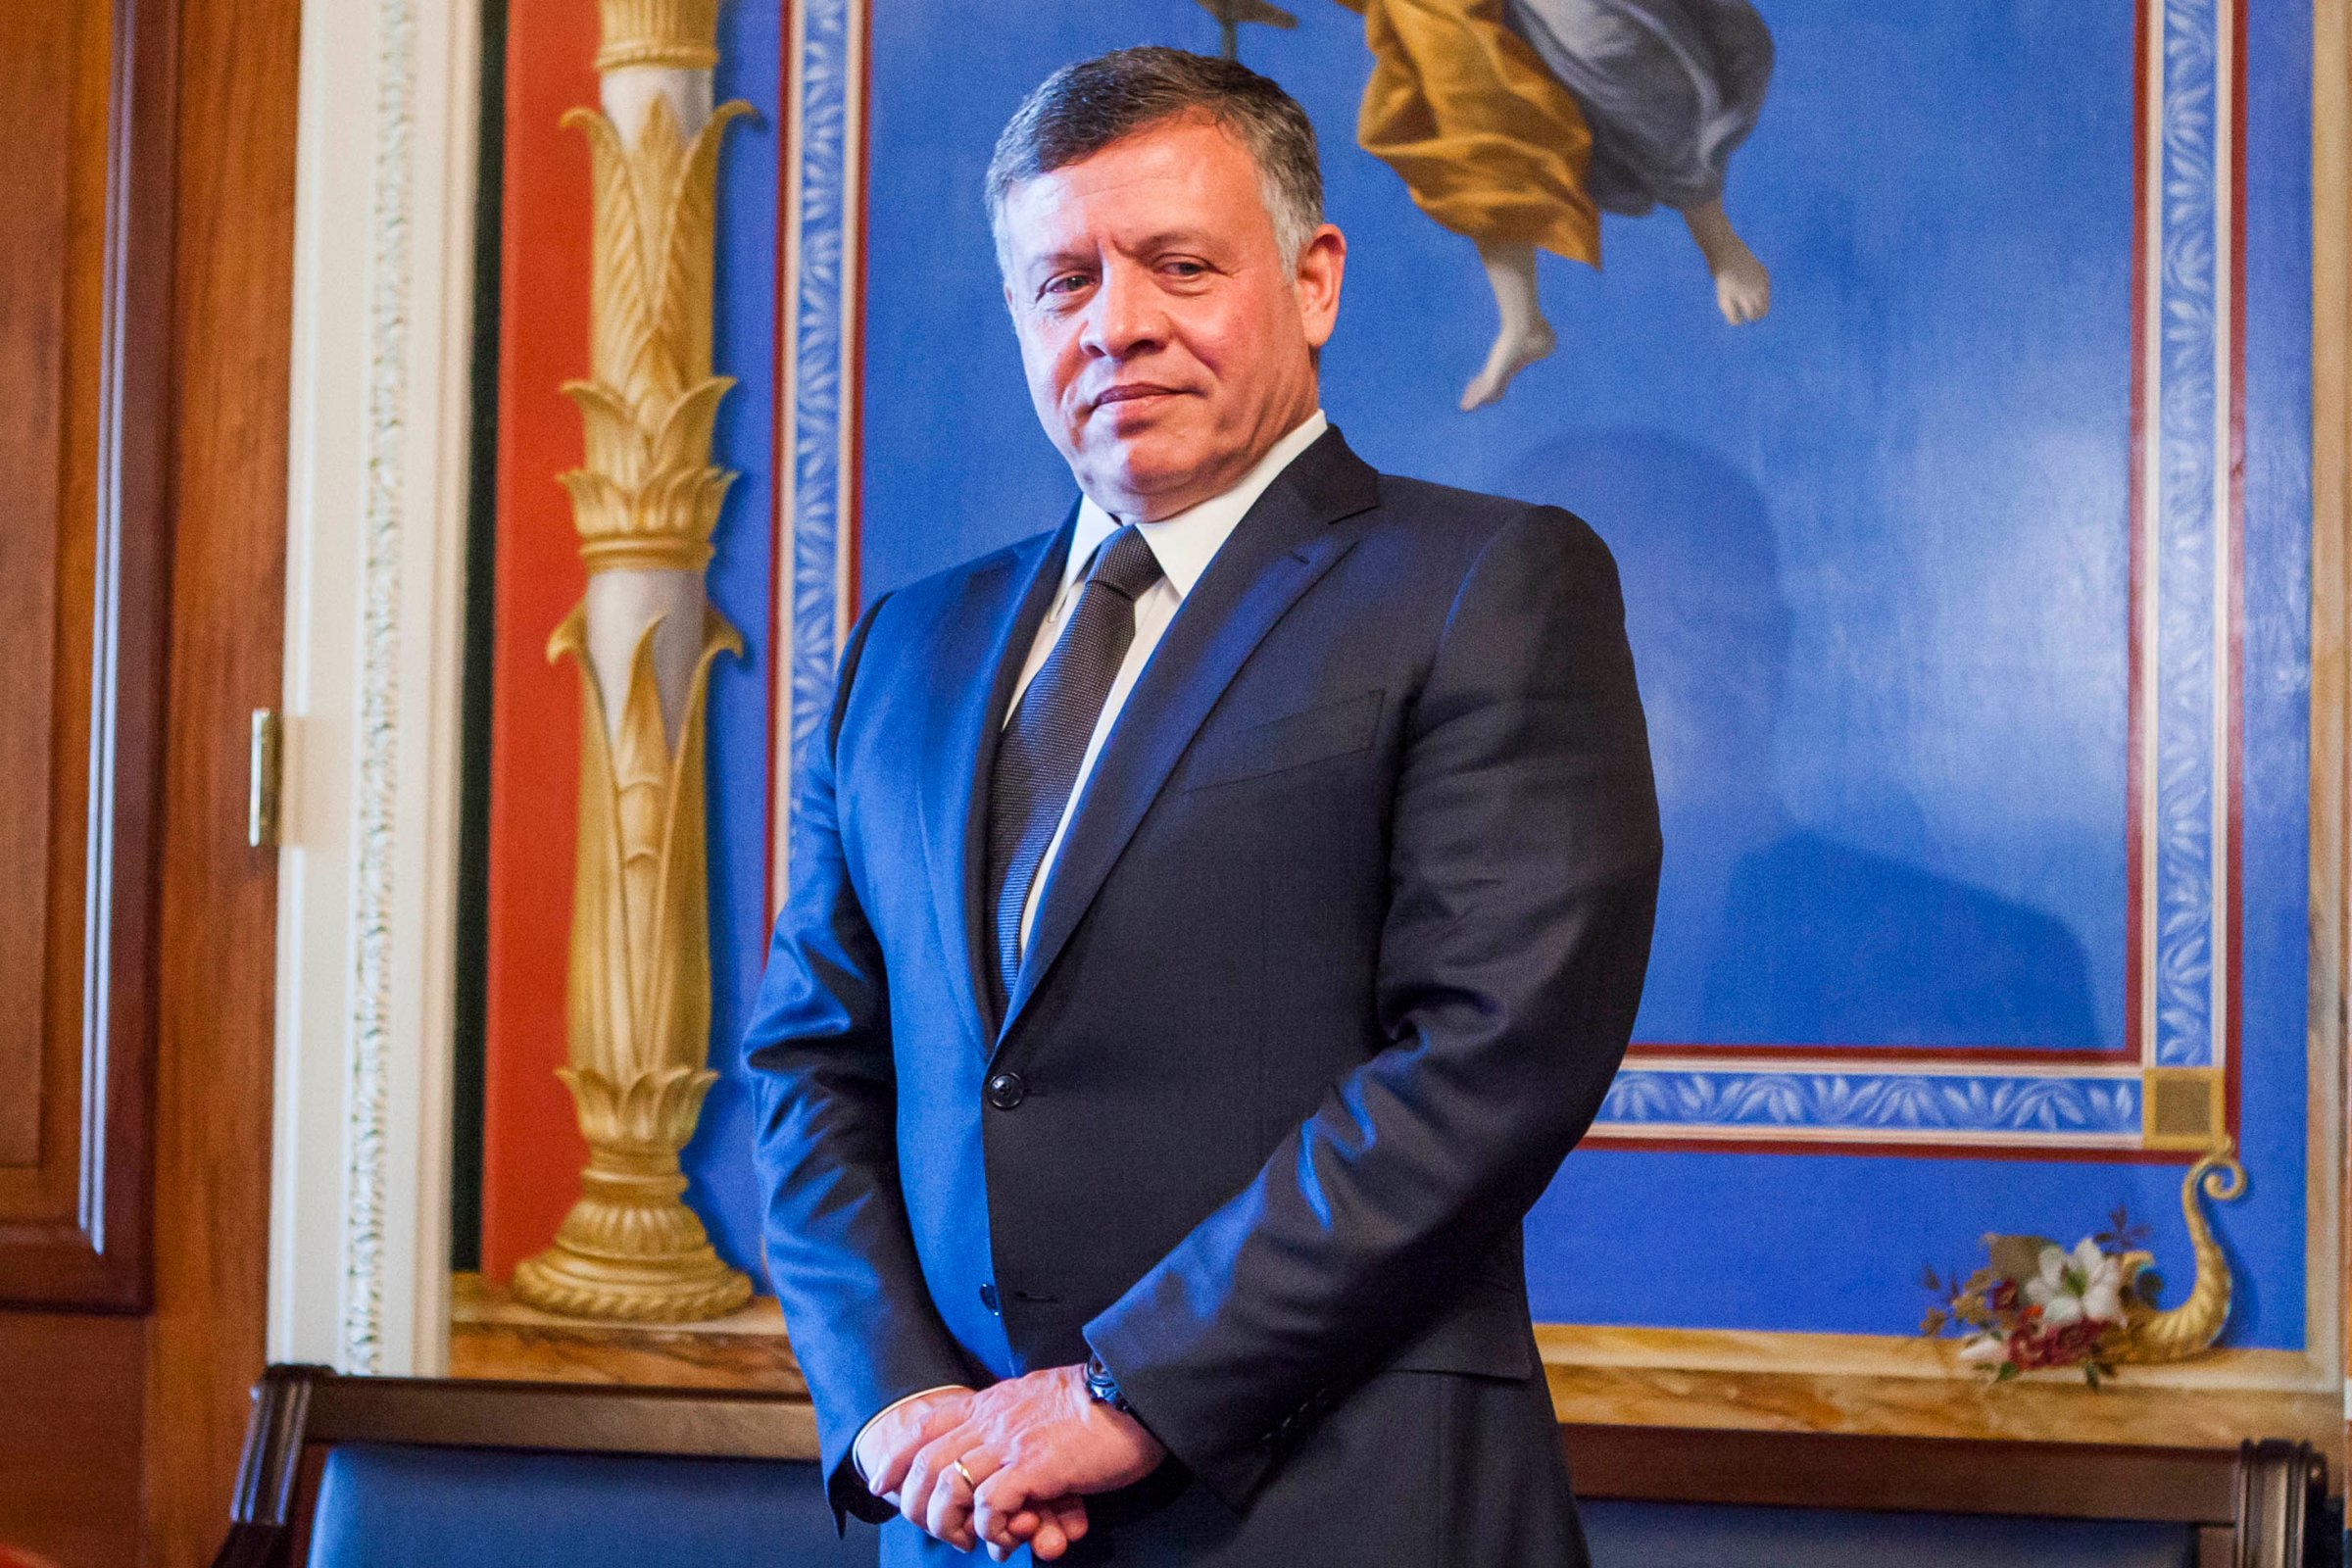 King Abdullah II of Jordan meets with members of the US Senate Appropriations Committee at the U.S. Captiol in Washington on Feb. 03, 2015.